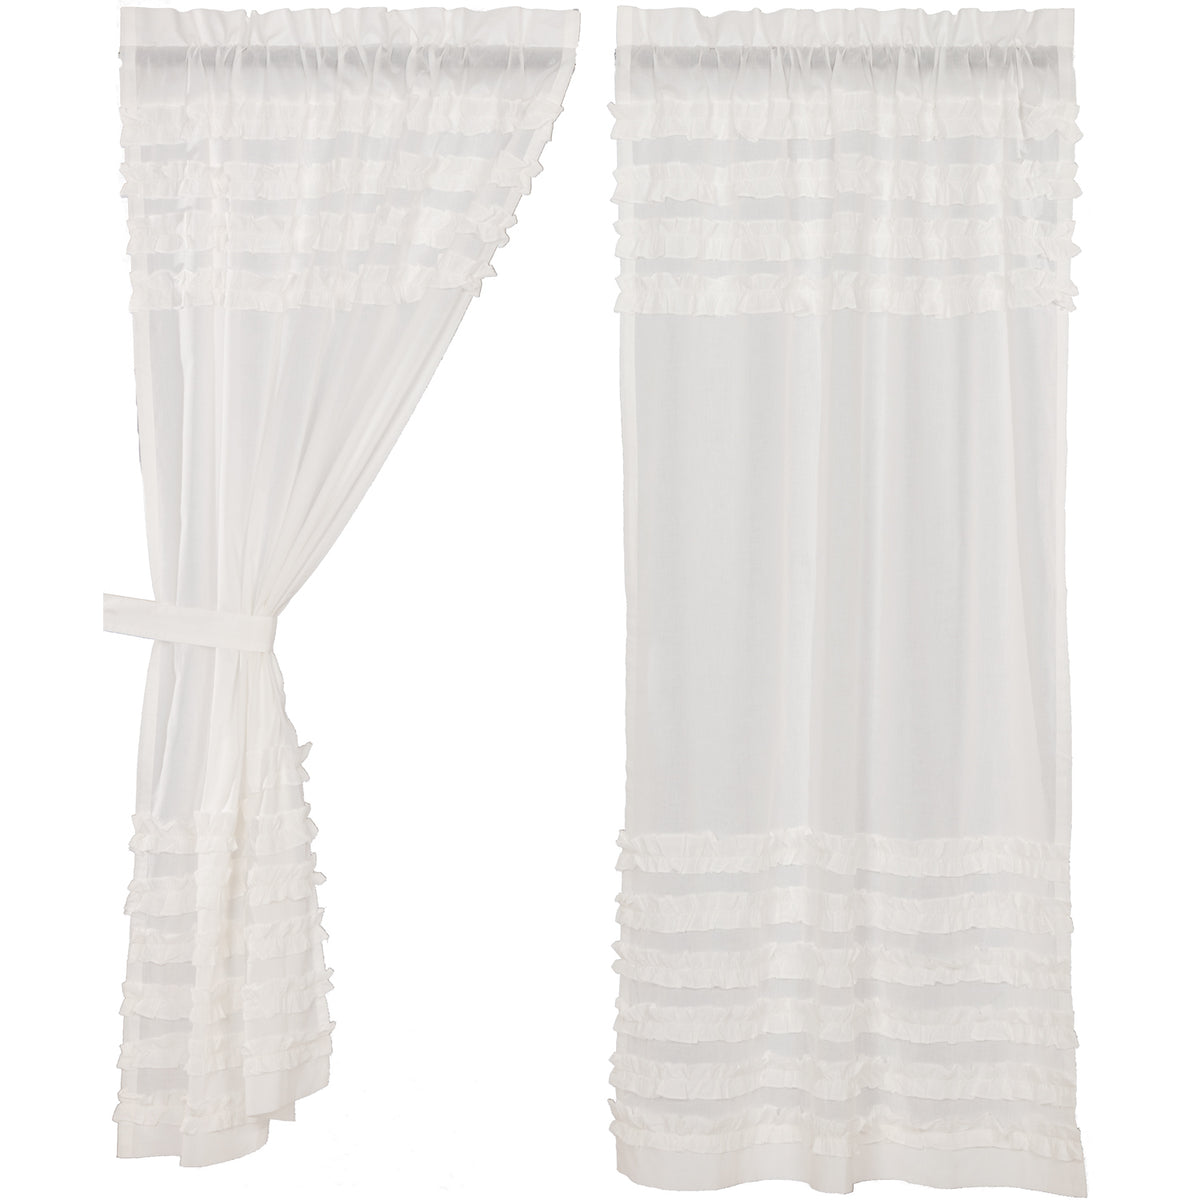 April & Olive White Ruffled Sheer Petticoat Short Panel Set of 2 63x36 By VHC Brands